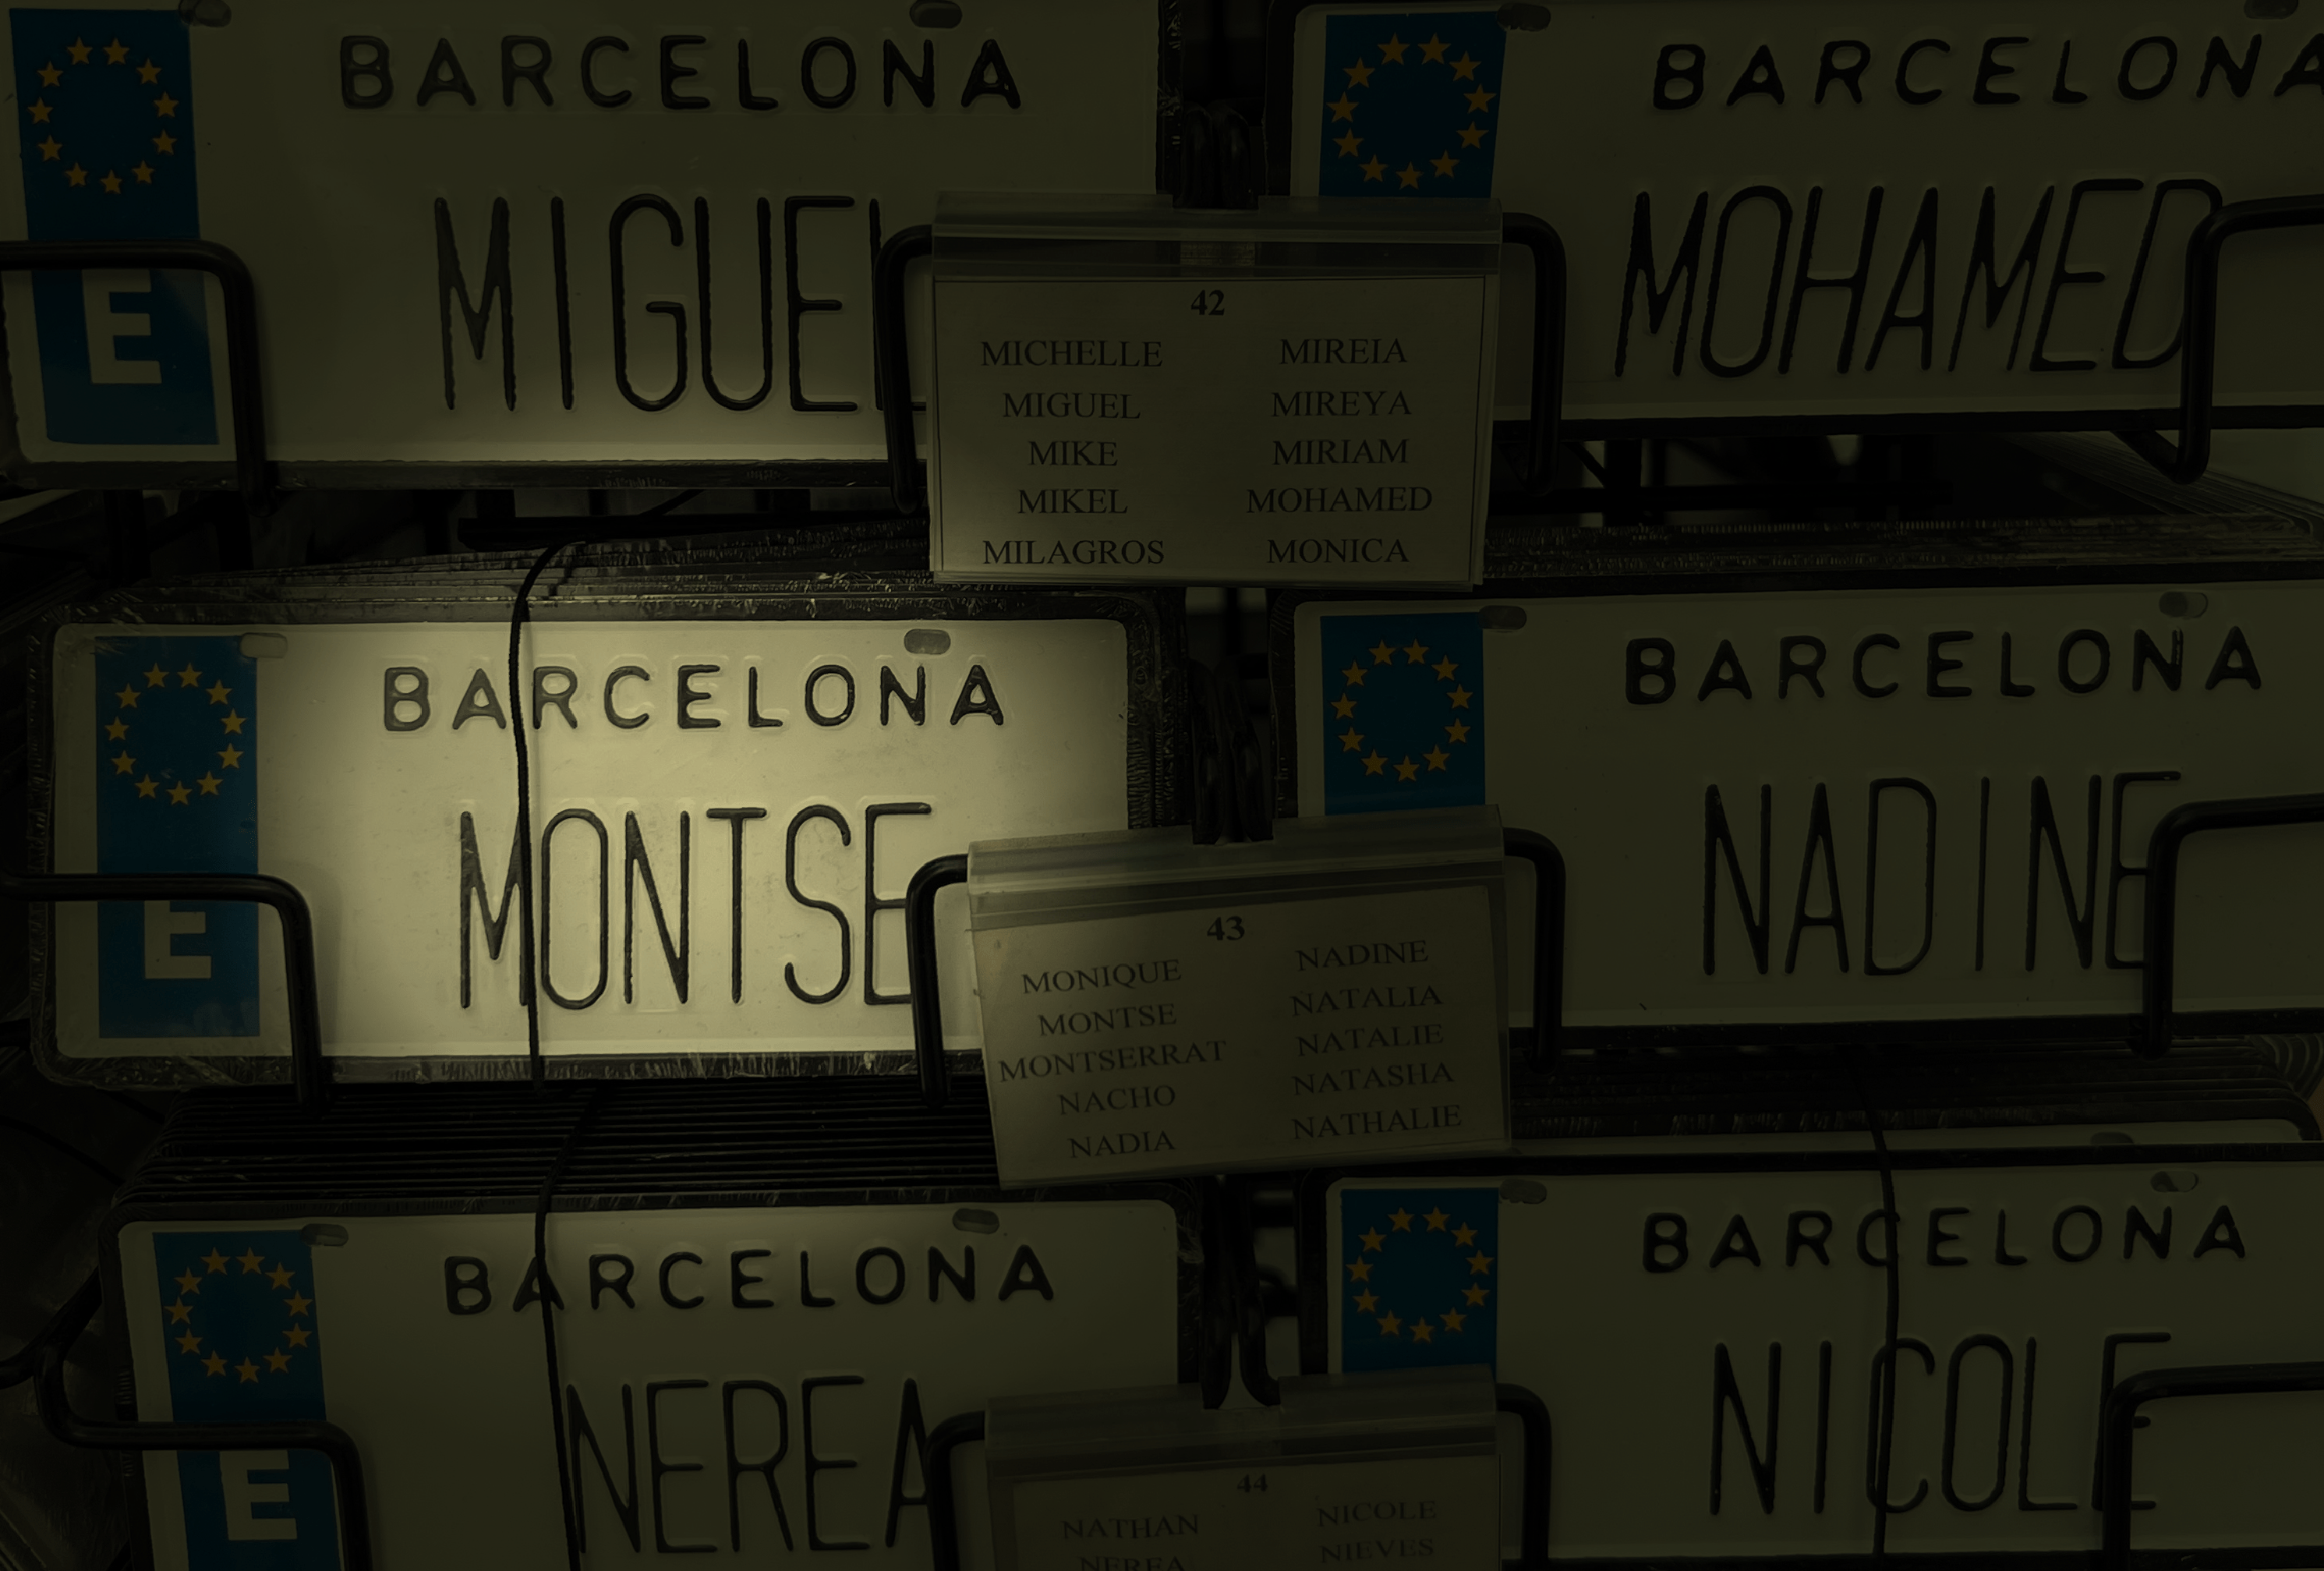 Edited photo of wall collection of Barcelona name plates, with "Montse" highlighted and in focus.